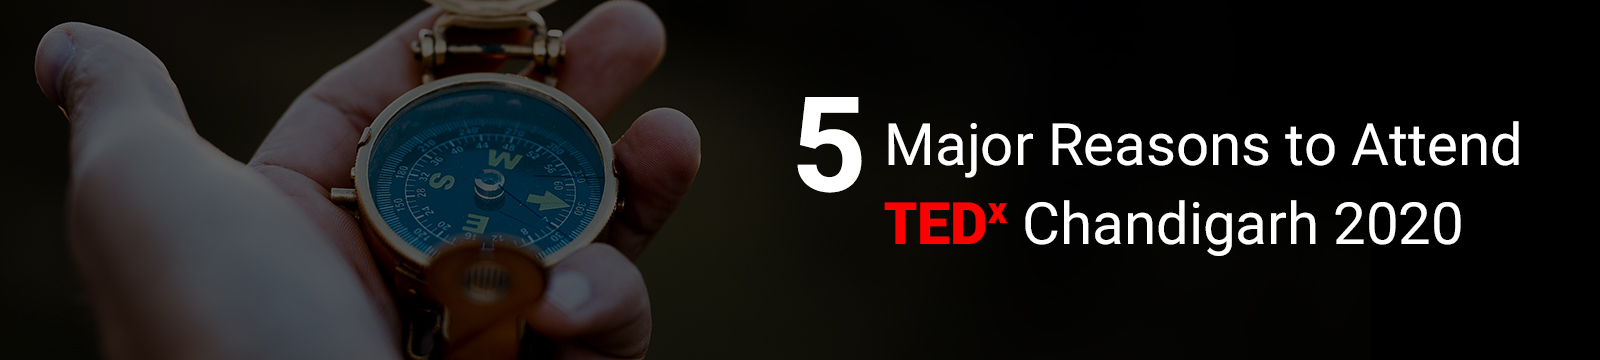 5 Major Reasons to Attend TEDxChandigarh 2020